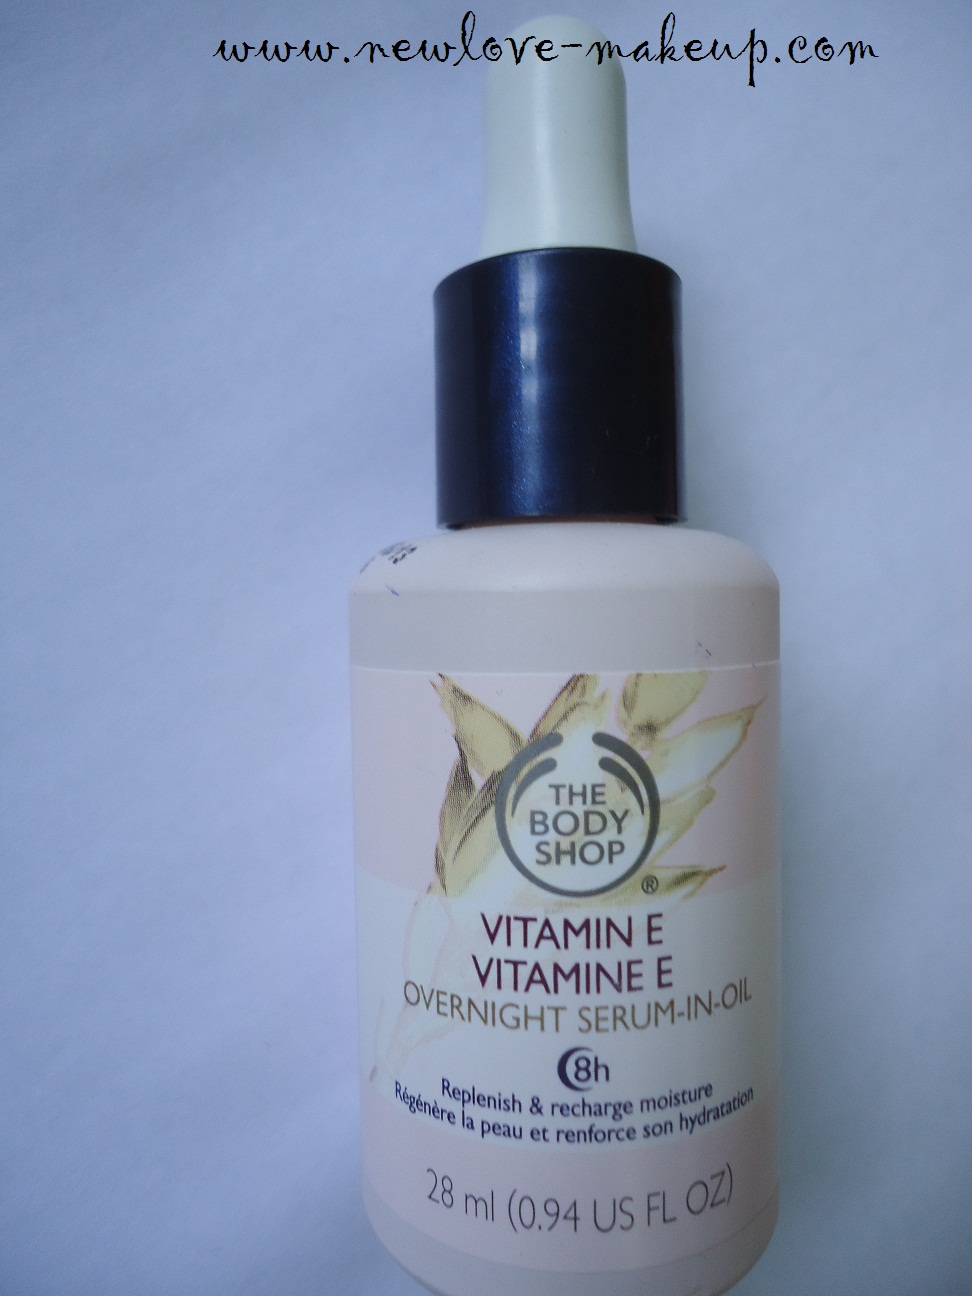 vat Voetganger Succes The Body Shop Vitamin E Overnight Serum-In-Oil Review - New Love - Makeup